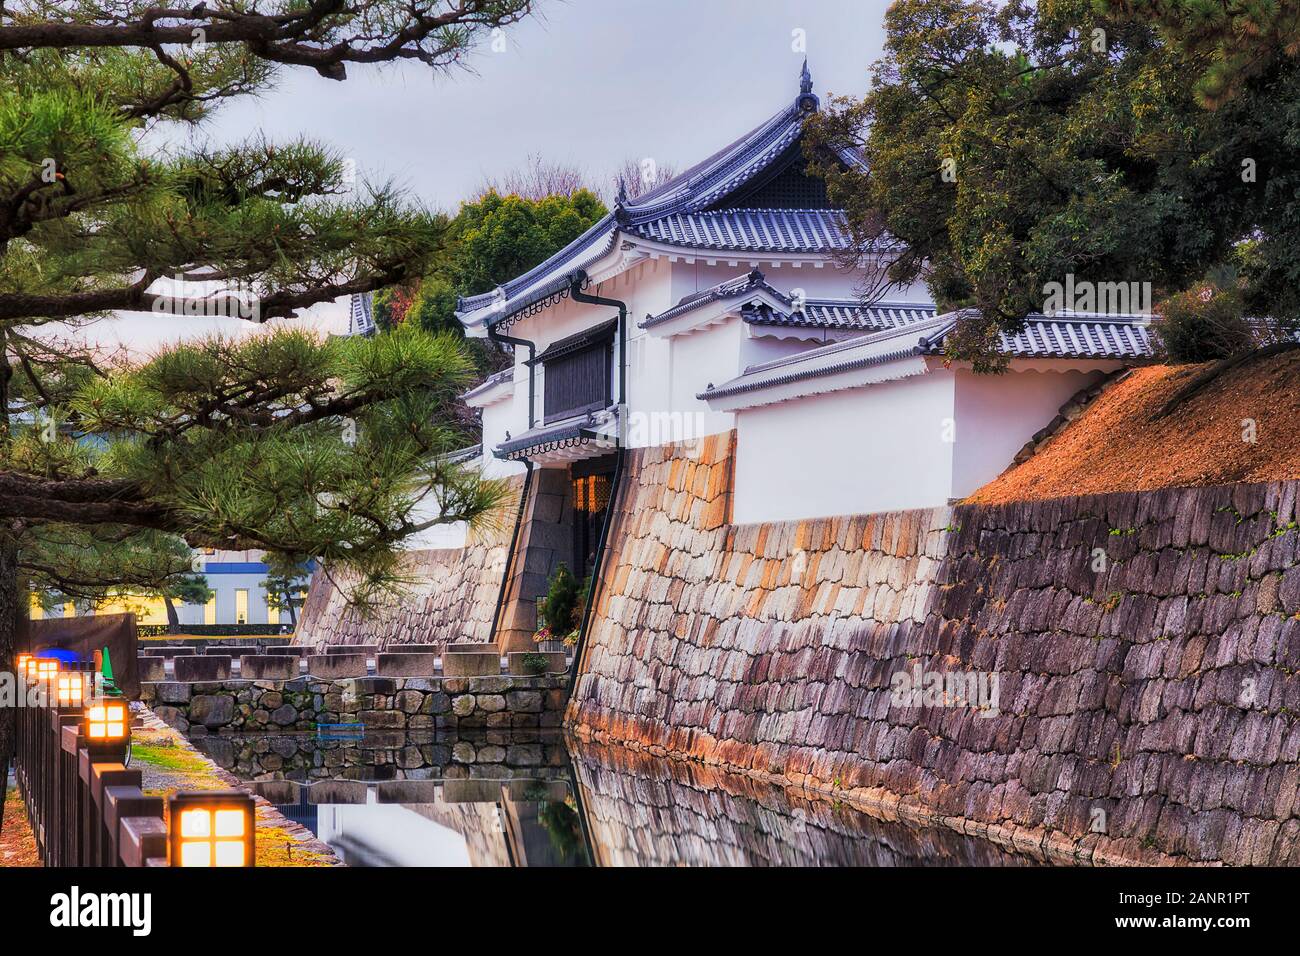 WHite tower and entrance gate to Nijo caste in Kyoto city - historic castle of local Shogun - present park, garden and heritage site surrounded by sto Stock Photo